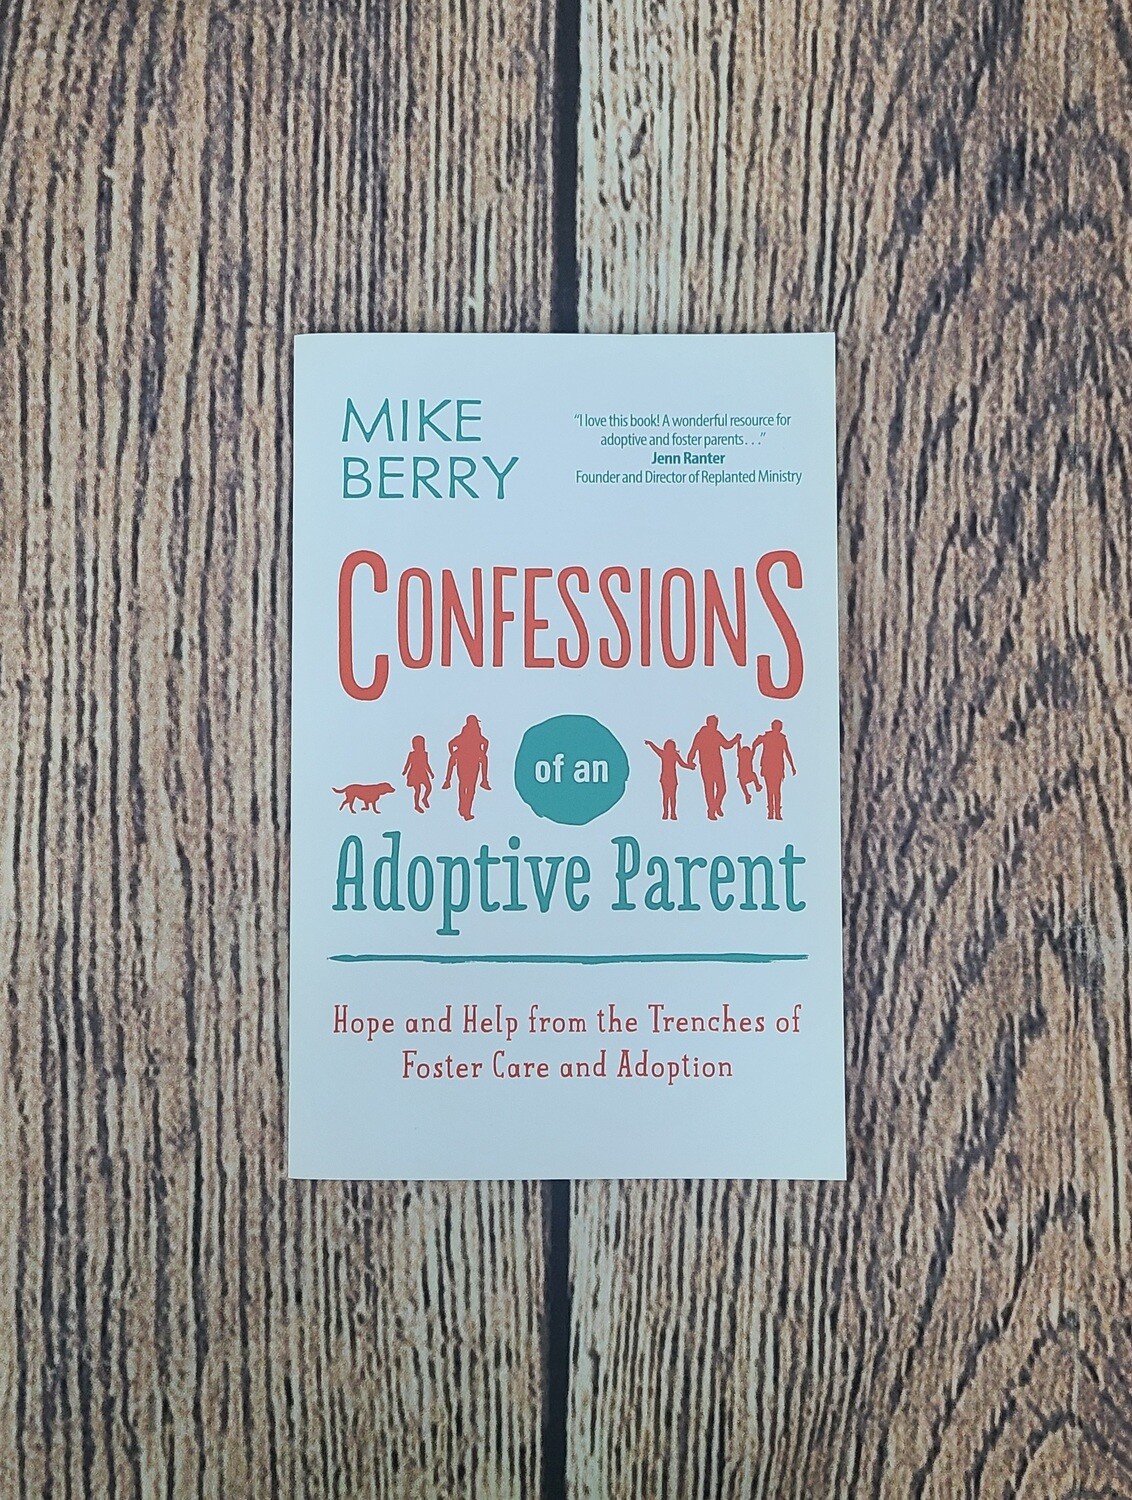 Confessions of an Adoptive Parent: Hope and Help from the Trenches of Foster Care and Adoption by Mike Berry